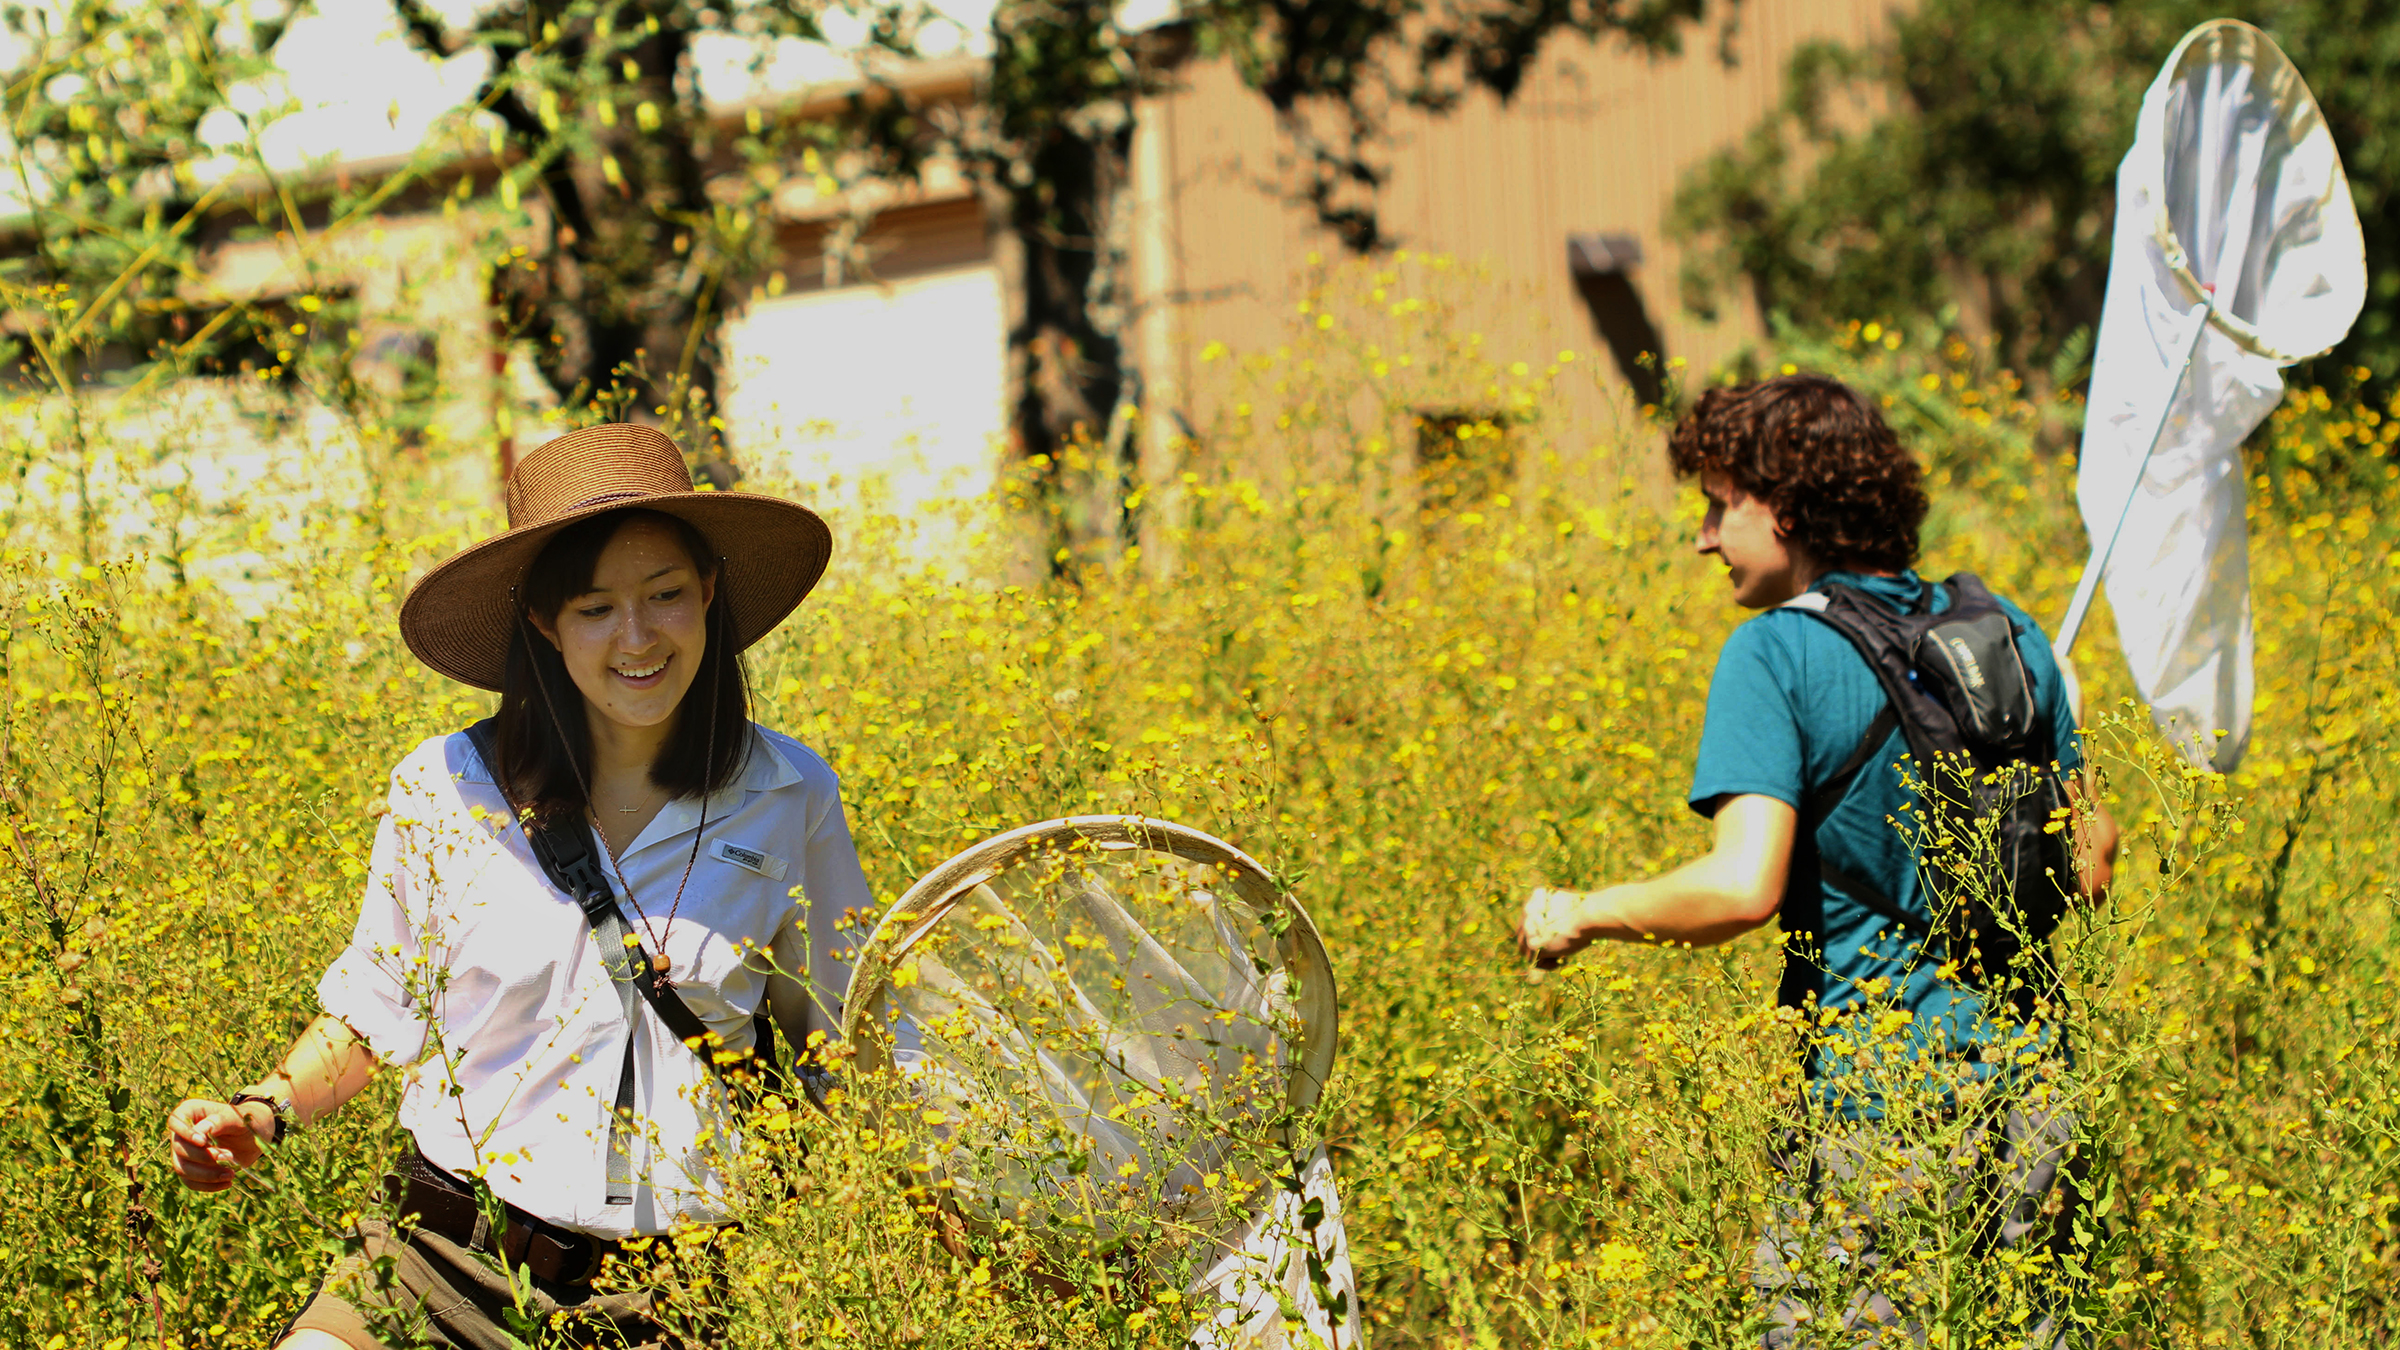 Students at Stengl amongst the wildflowers holding butterfly nets